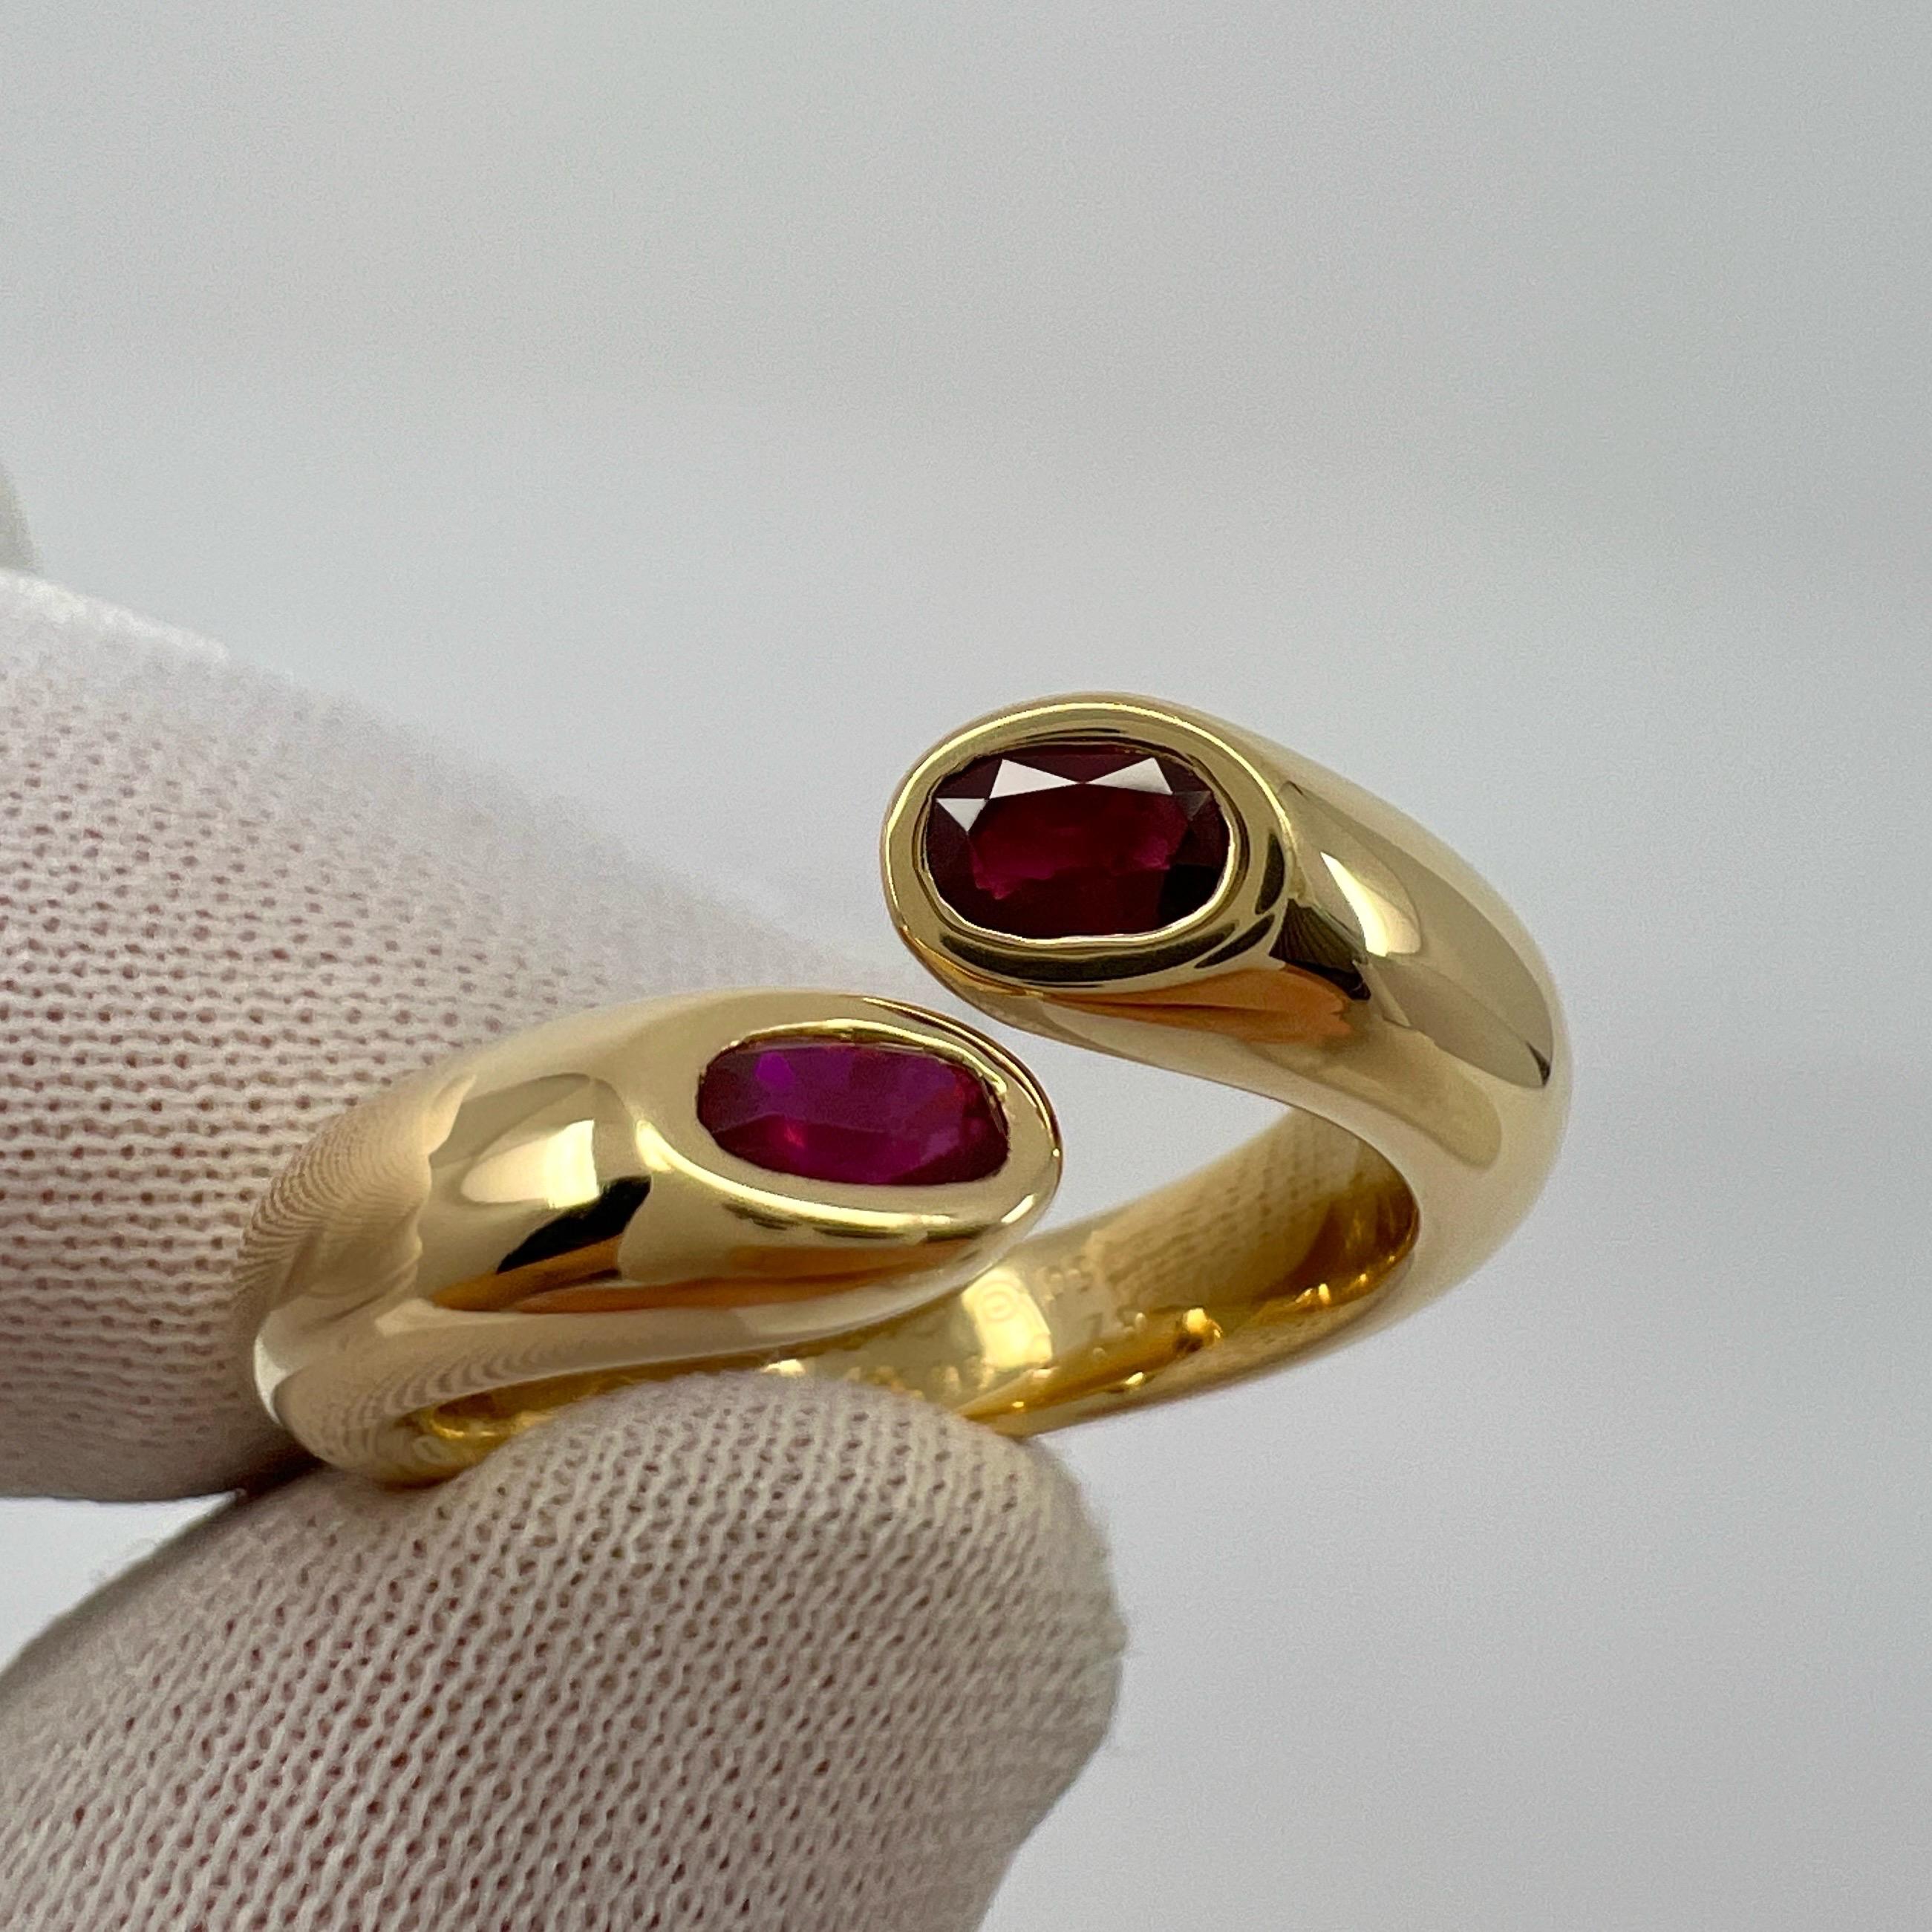 Rare Vintage Cartier Red Ruby Ellipse Oval Cut 18k Gold Bypass Split Ring 48 4.5 For Sale 7